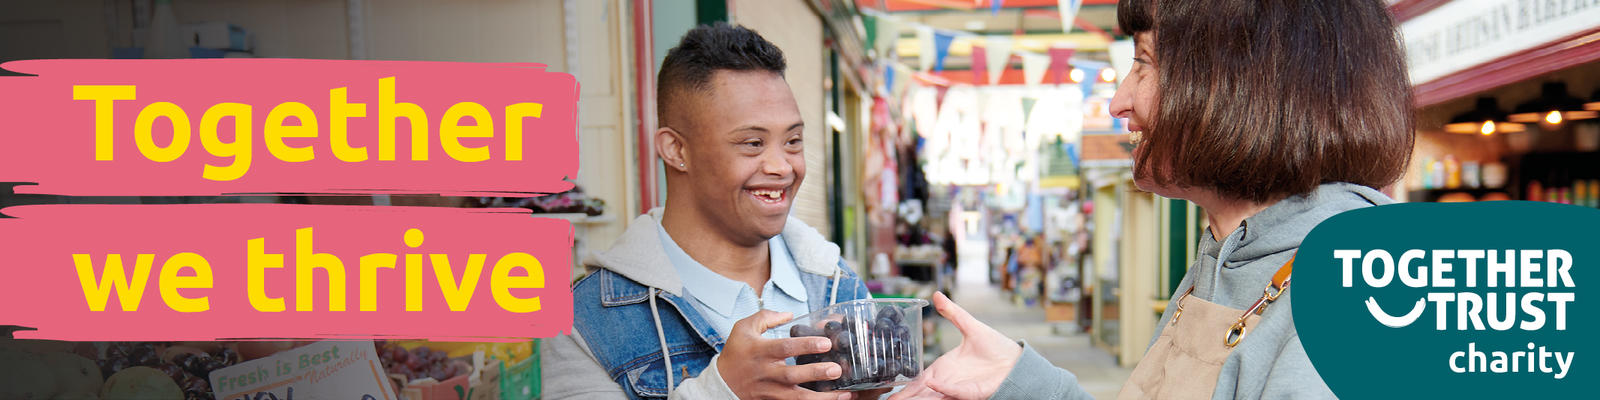 Young man with down syndrome smiling at a shop keeper. She is handing him a punnet of berries. They are in an indoor market. 